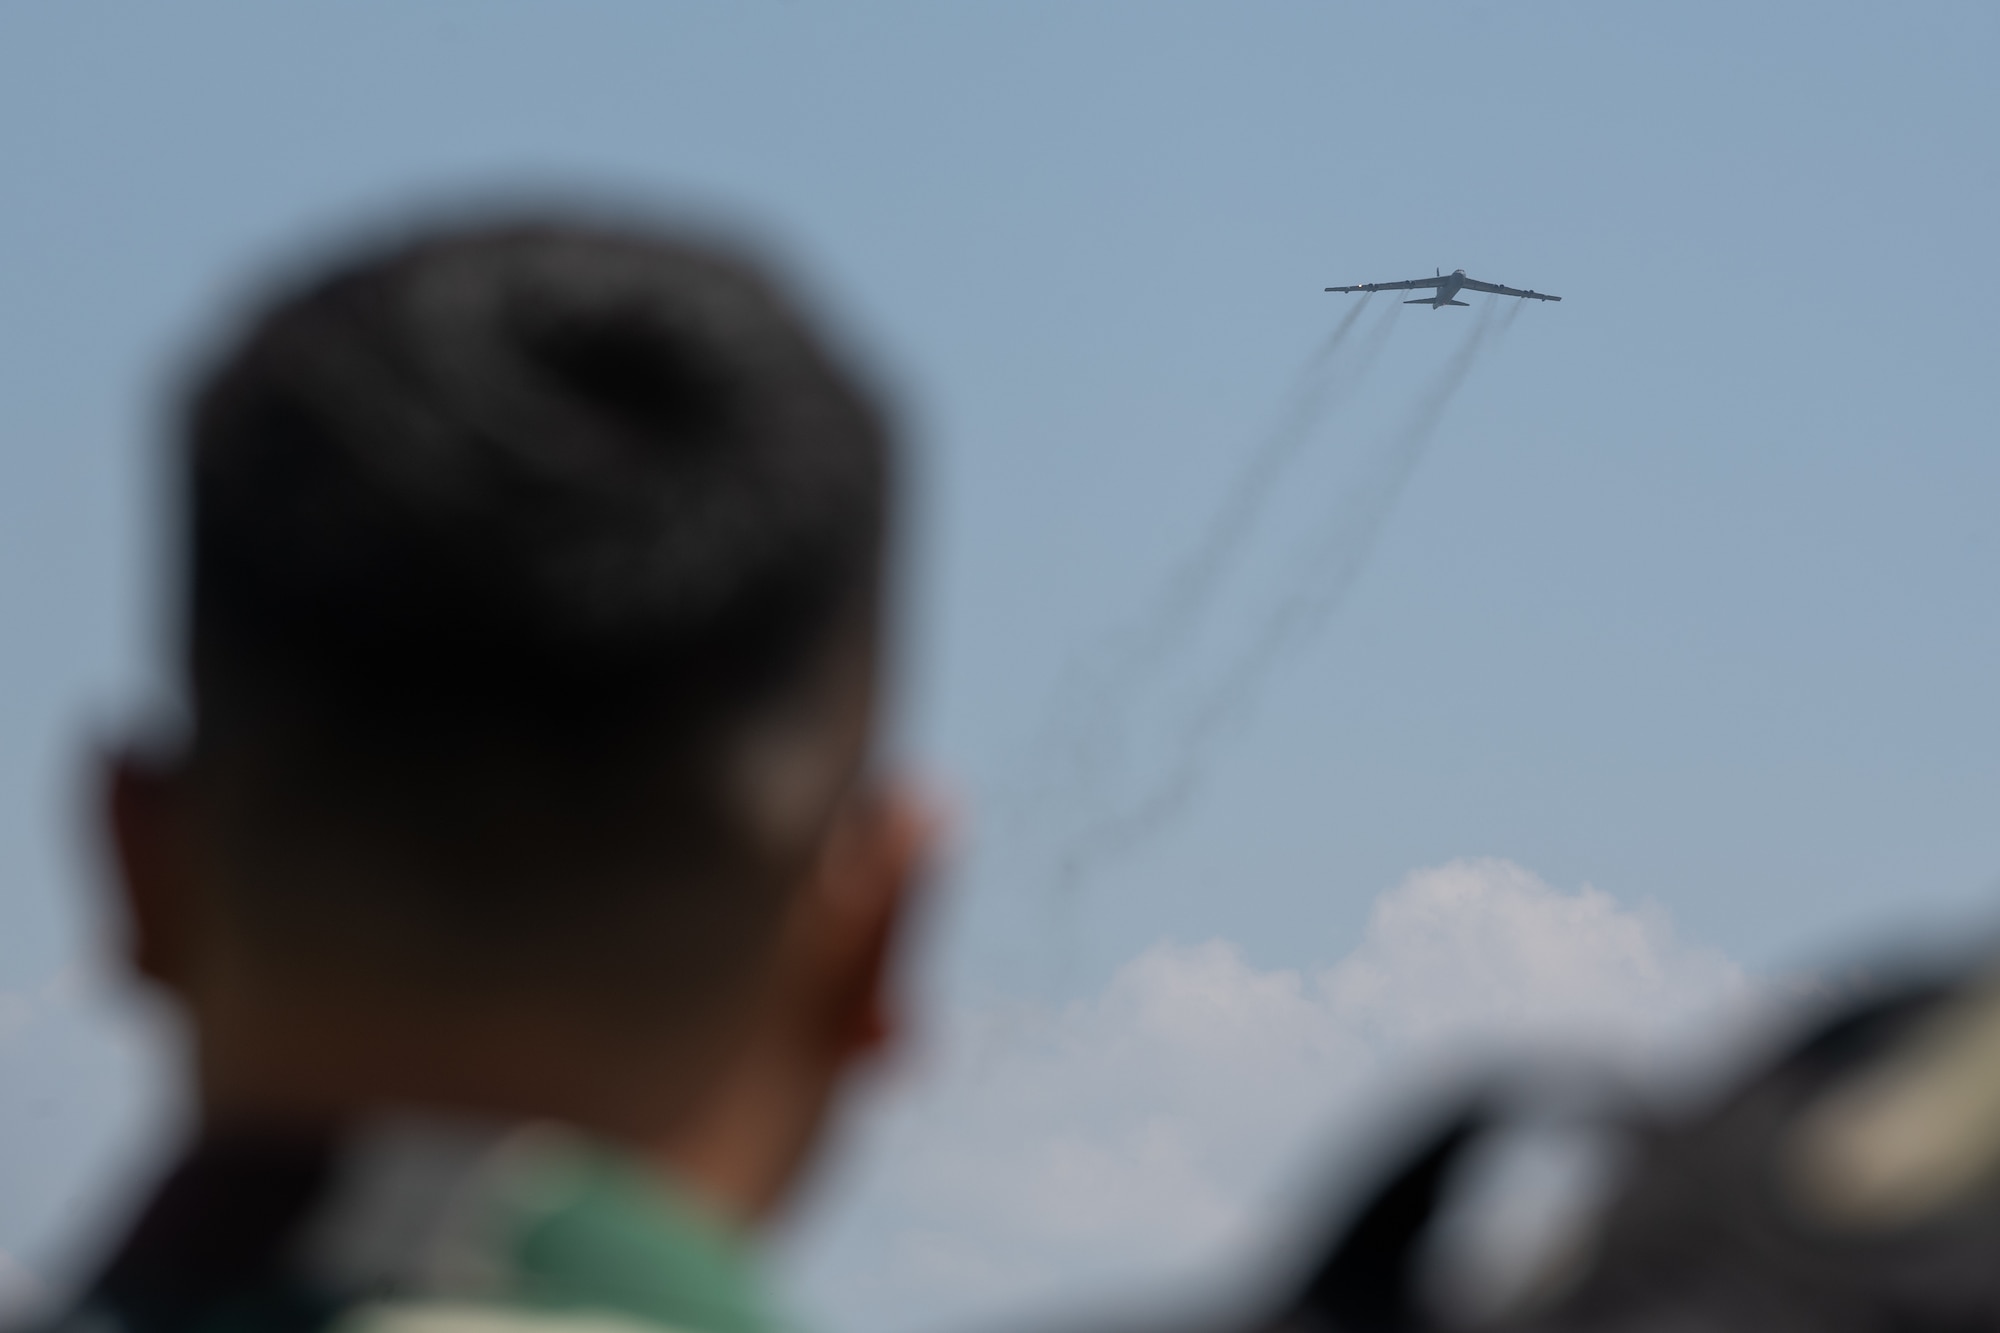 A member of the Tentara Nasional Indonesia Angkatan Udara, or Indonesian Air Force, watches as a U.S. Air Force B-52H Stratofortress assigned to the 23rd Bomb Squadron at Minot Air Force Base, North Dakota, approaches for landing at the Kualanamu International Airport in Medan, Indonesia, June 19, 2023. The arrival of the B-52 marked the first time a U.S. Air Force B-52 had landed on Indonesian soil. (U.S. Air Force photo by Tech. Sgt. Zade Vadnais)